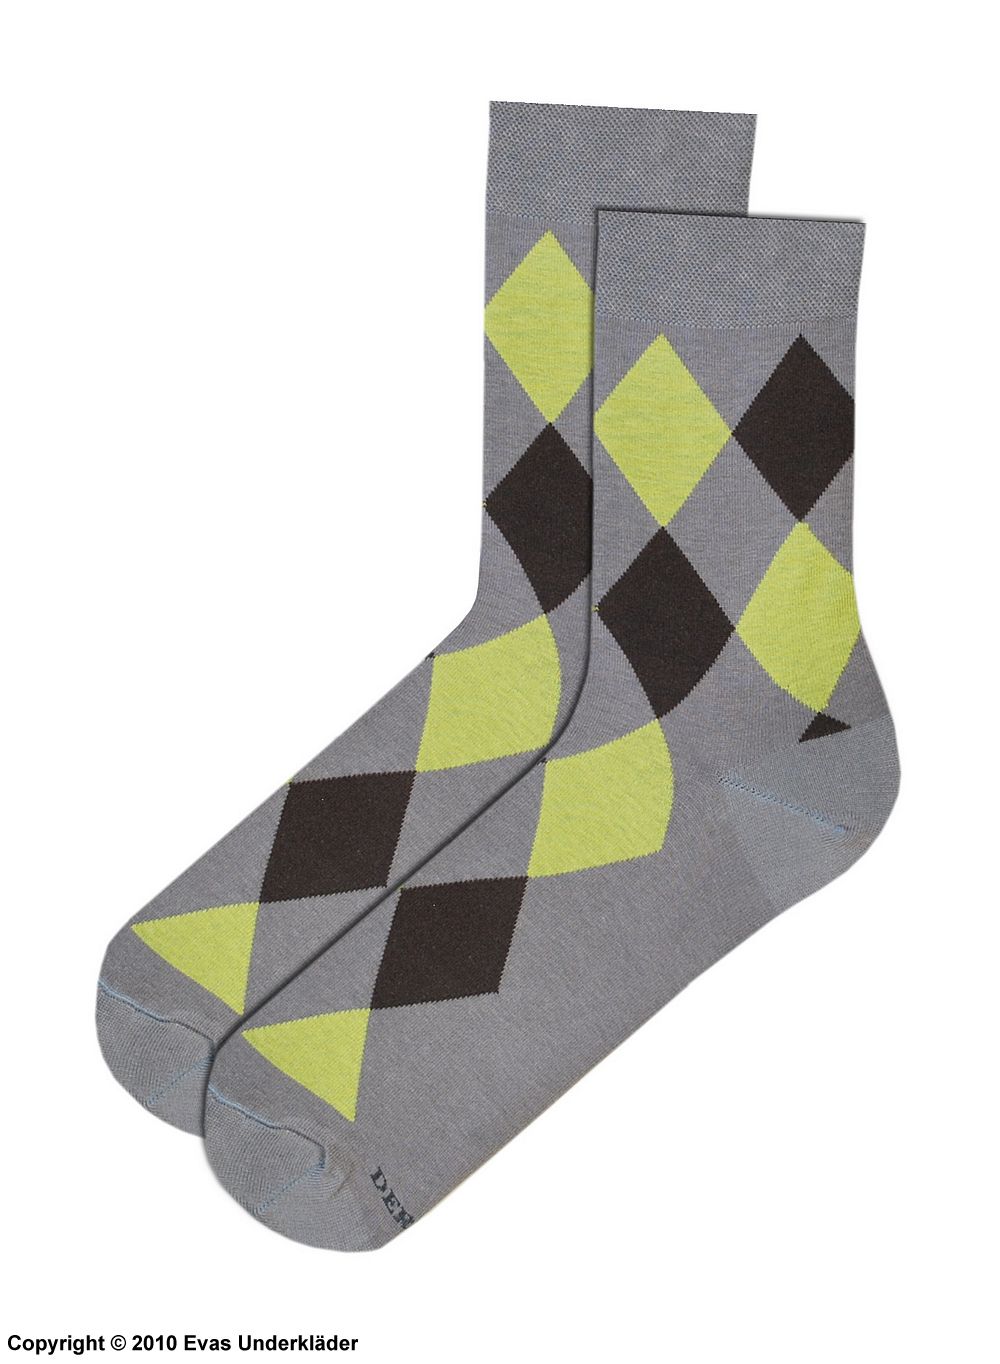 Warm socks with extra thick cotton for cold feet